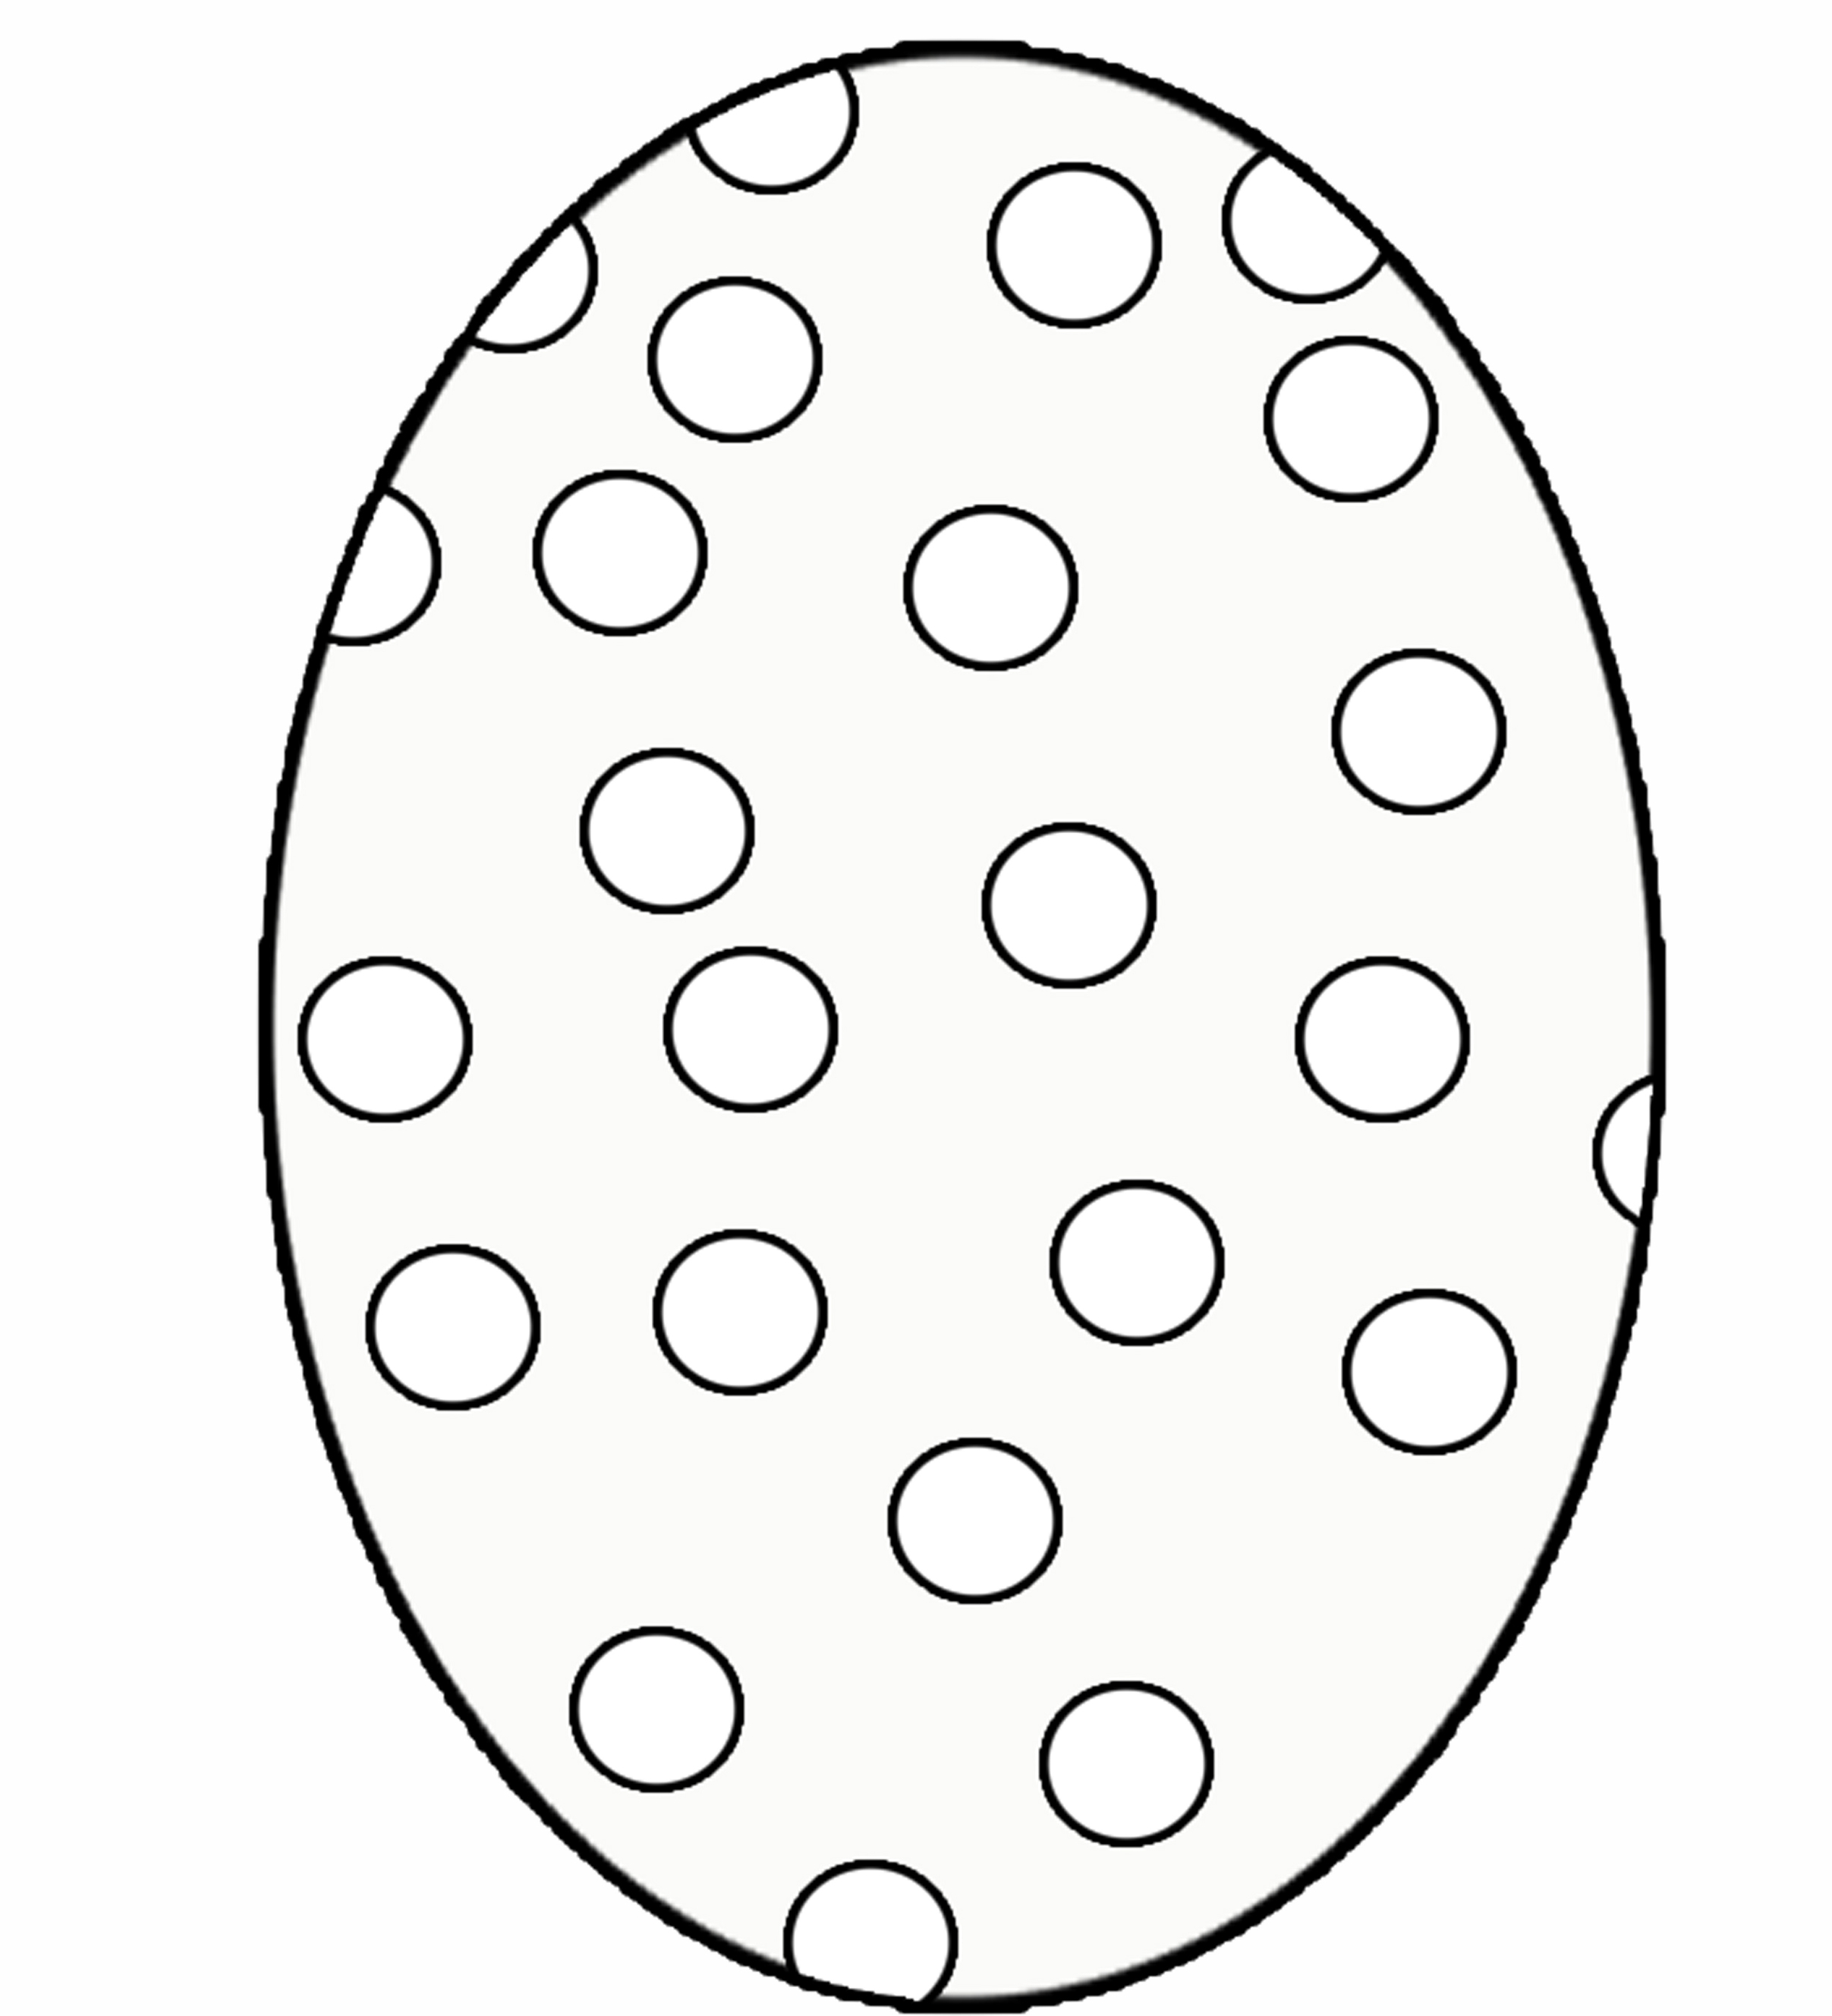 Blank Easter Egg Template Clipart - Free to use Clip Art Resource